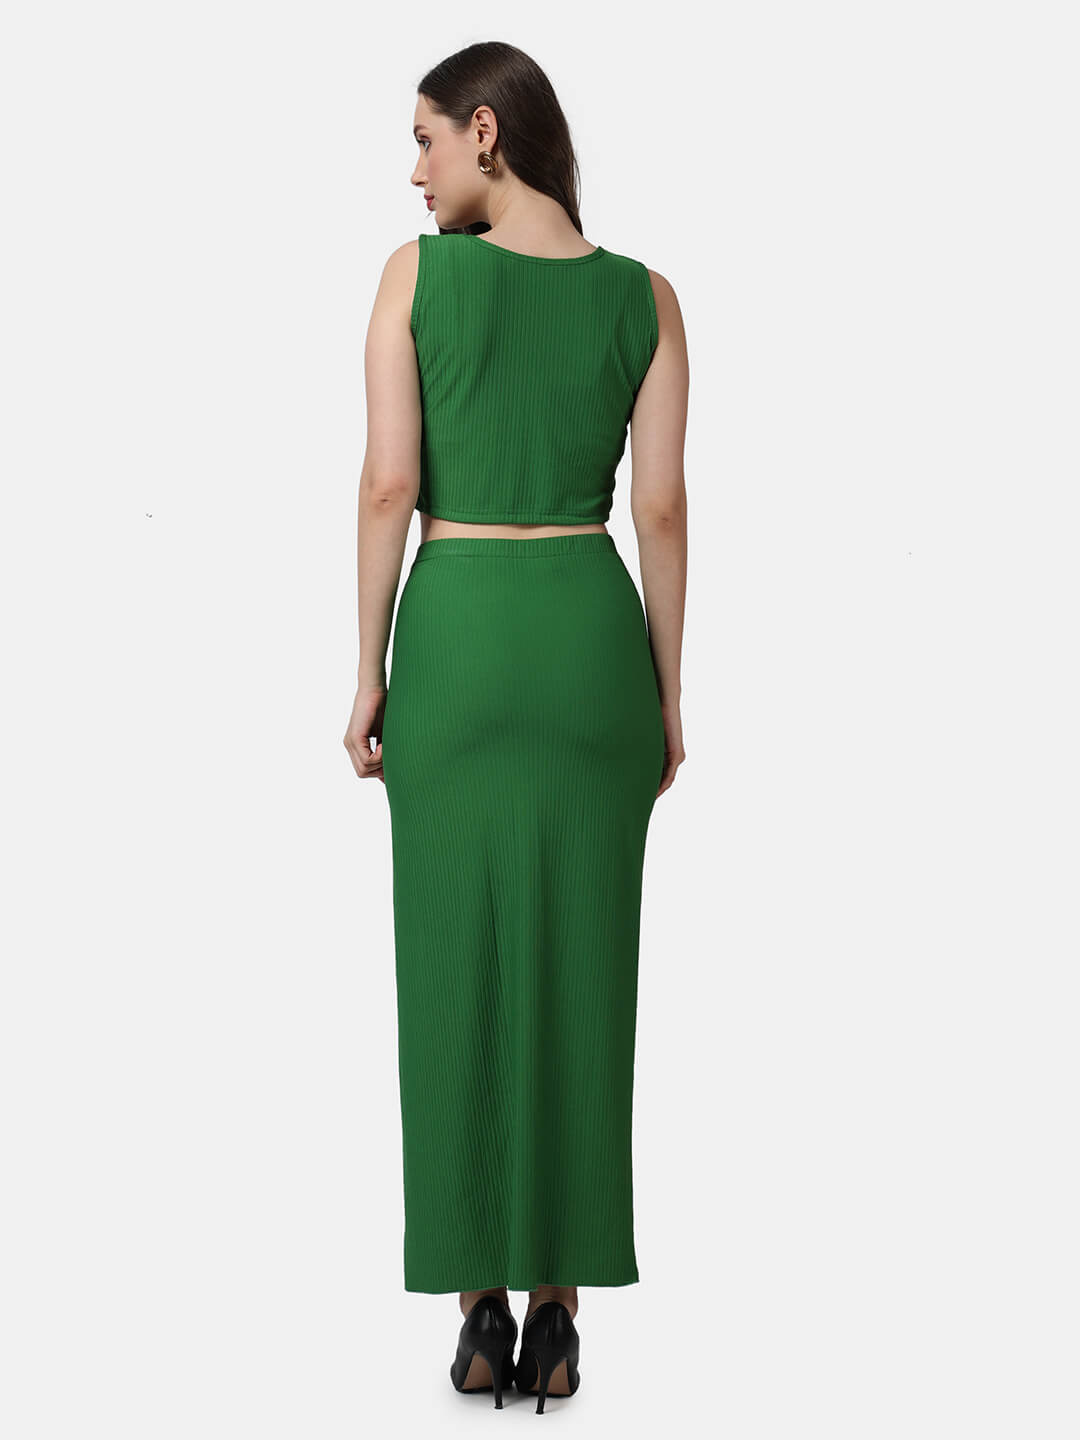 Popwings Women Casual Polyester Green Solid Crop Top and Long Slit Skirt Co-Ords Set